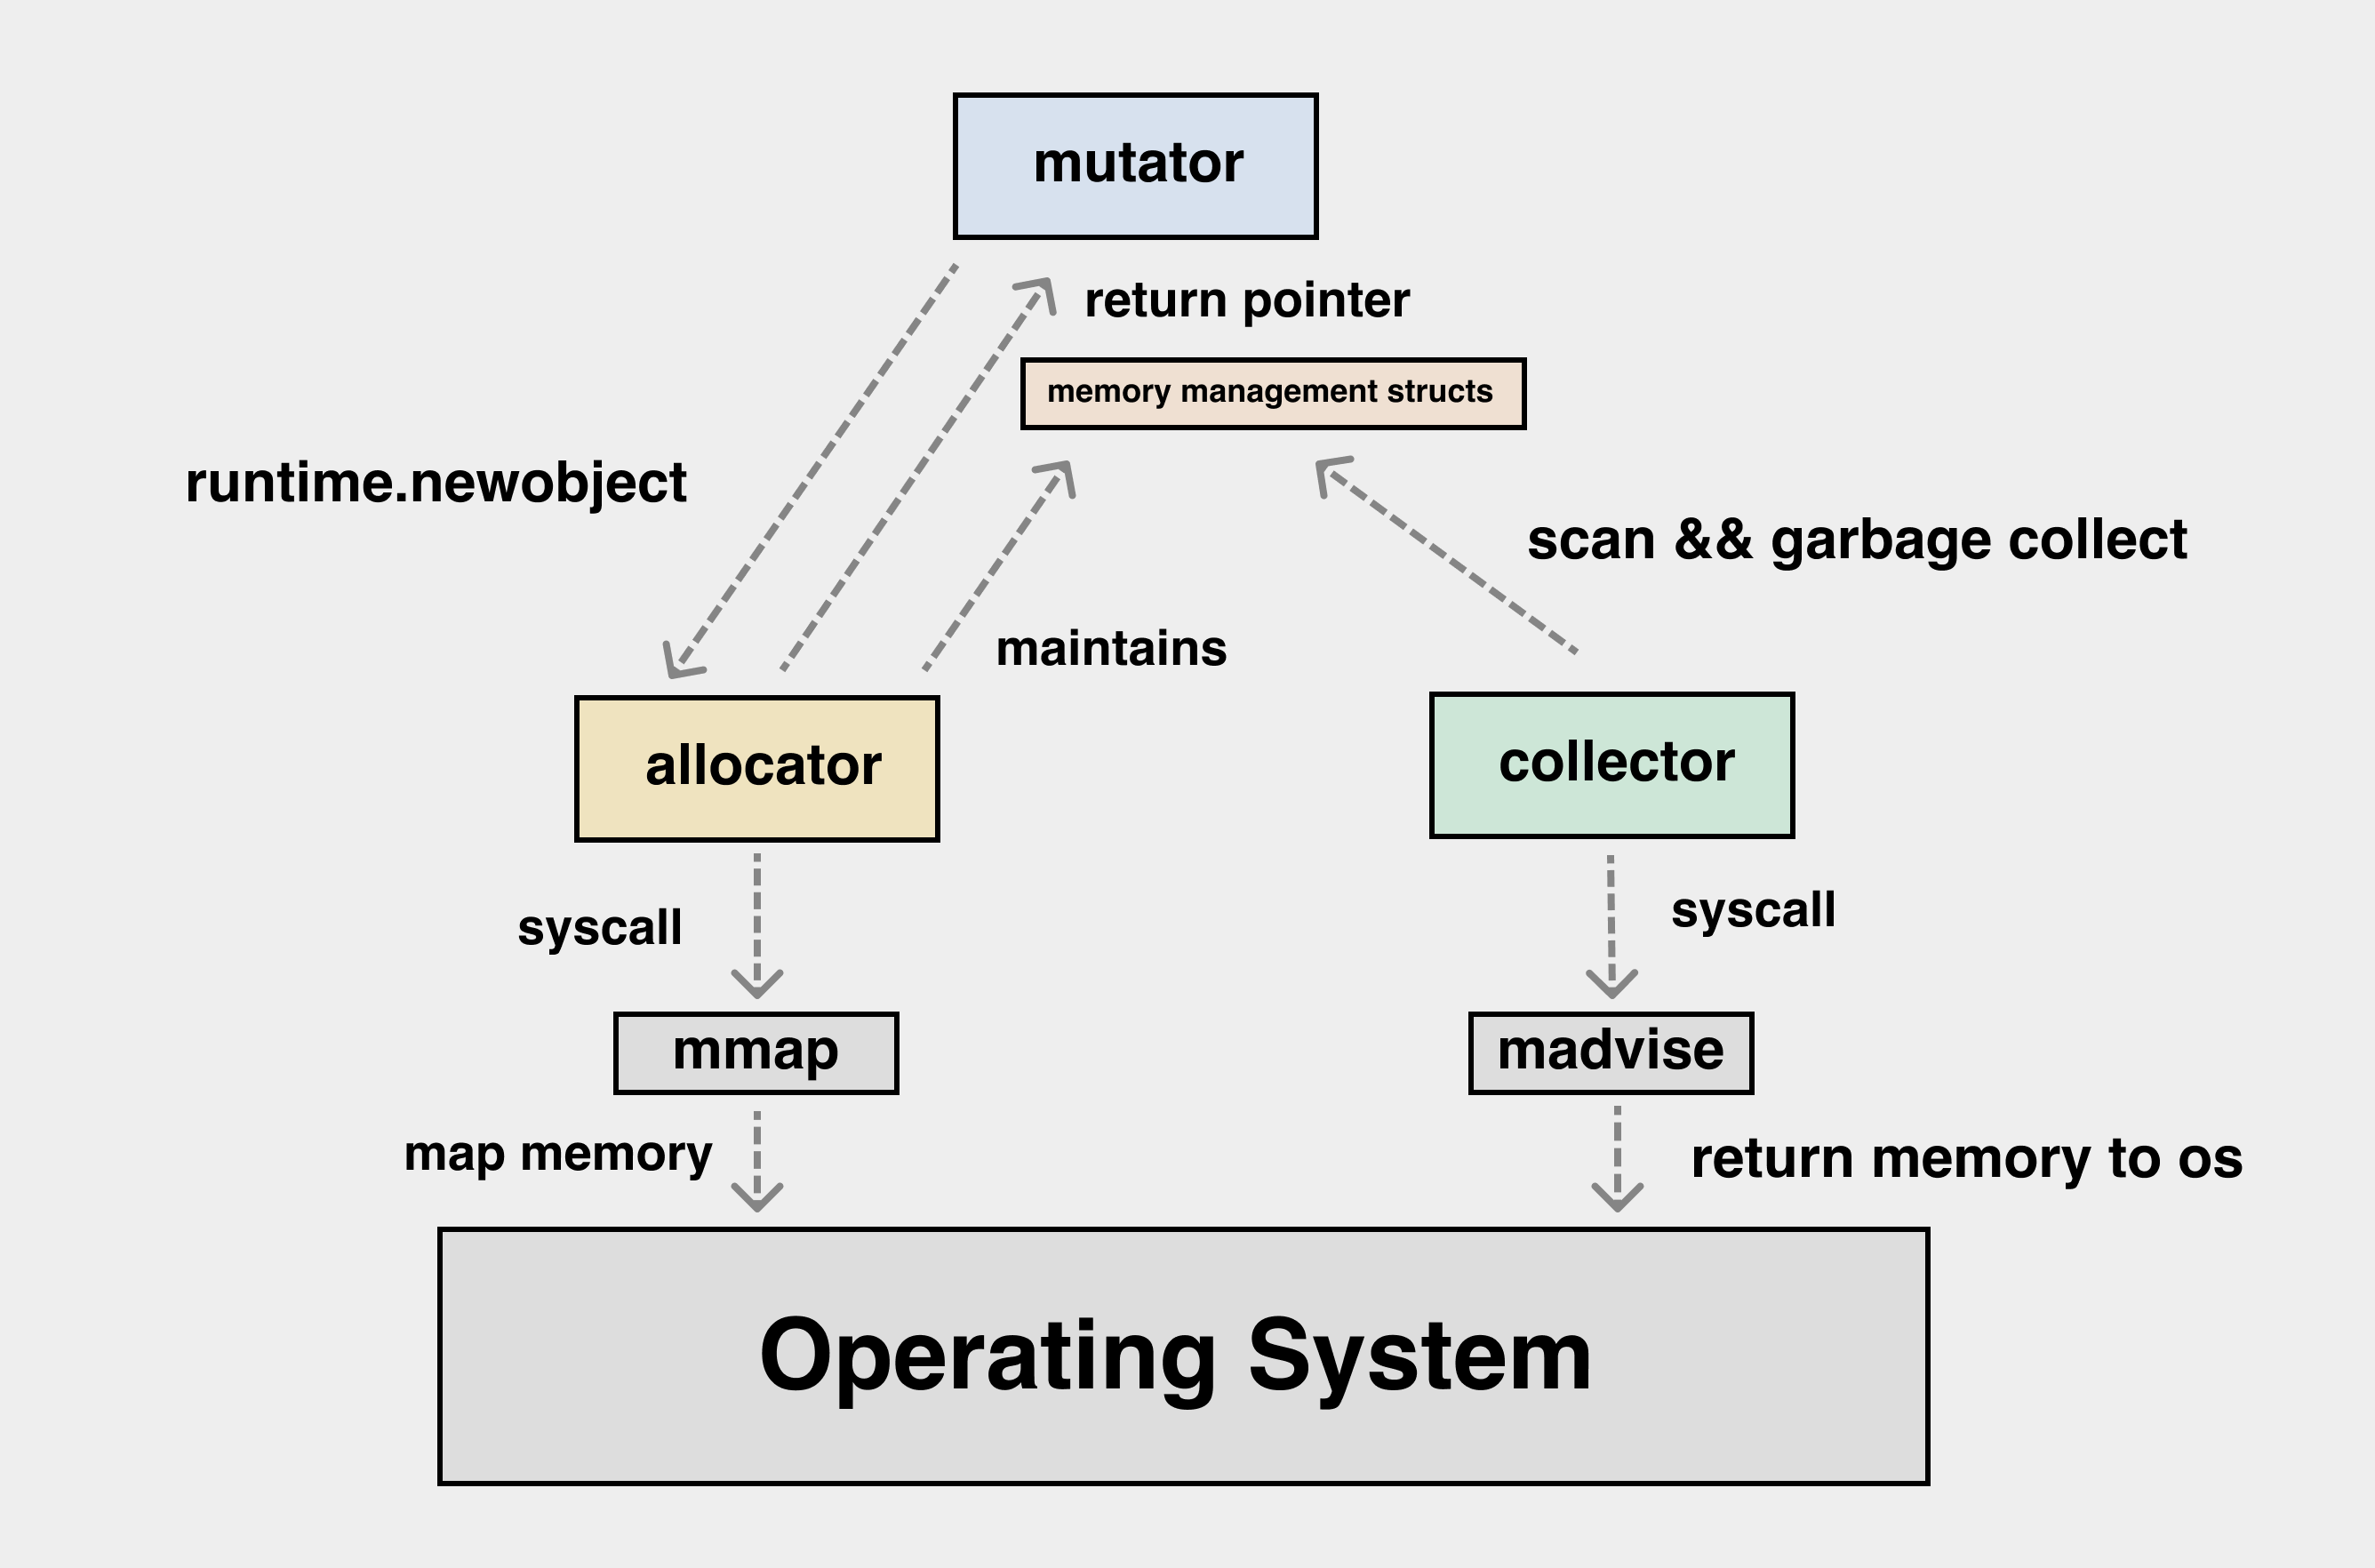 mutator, allocator and garbage collector